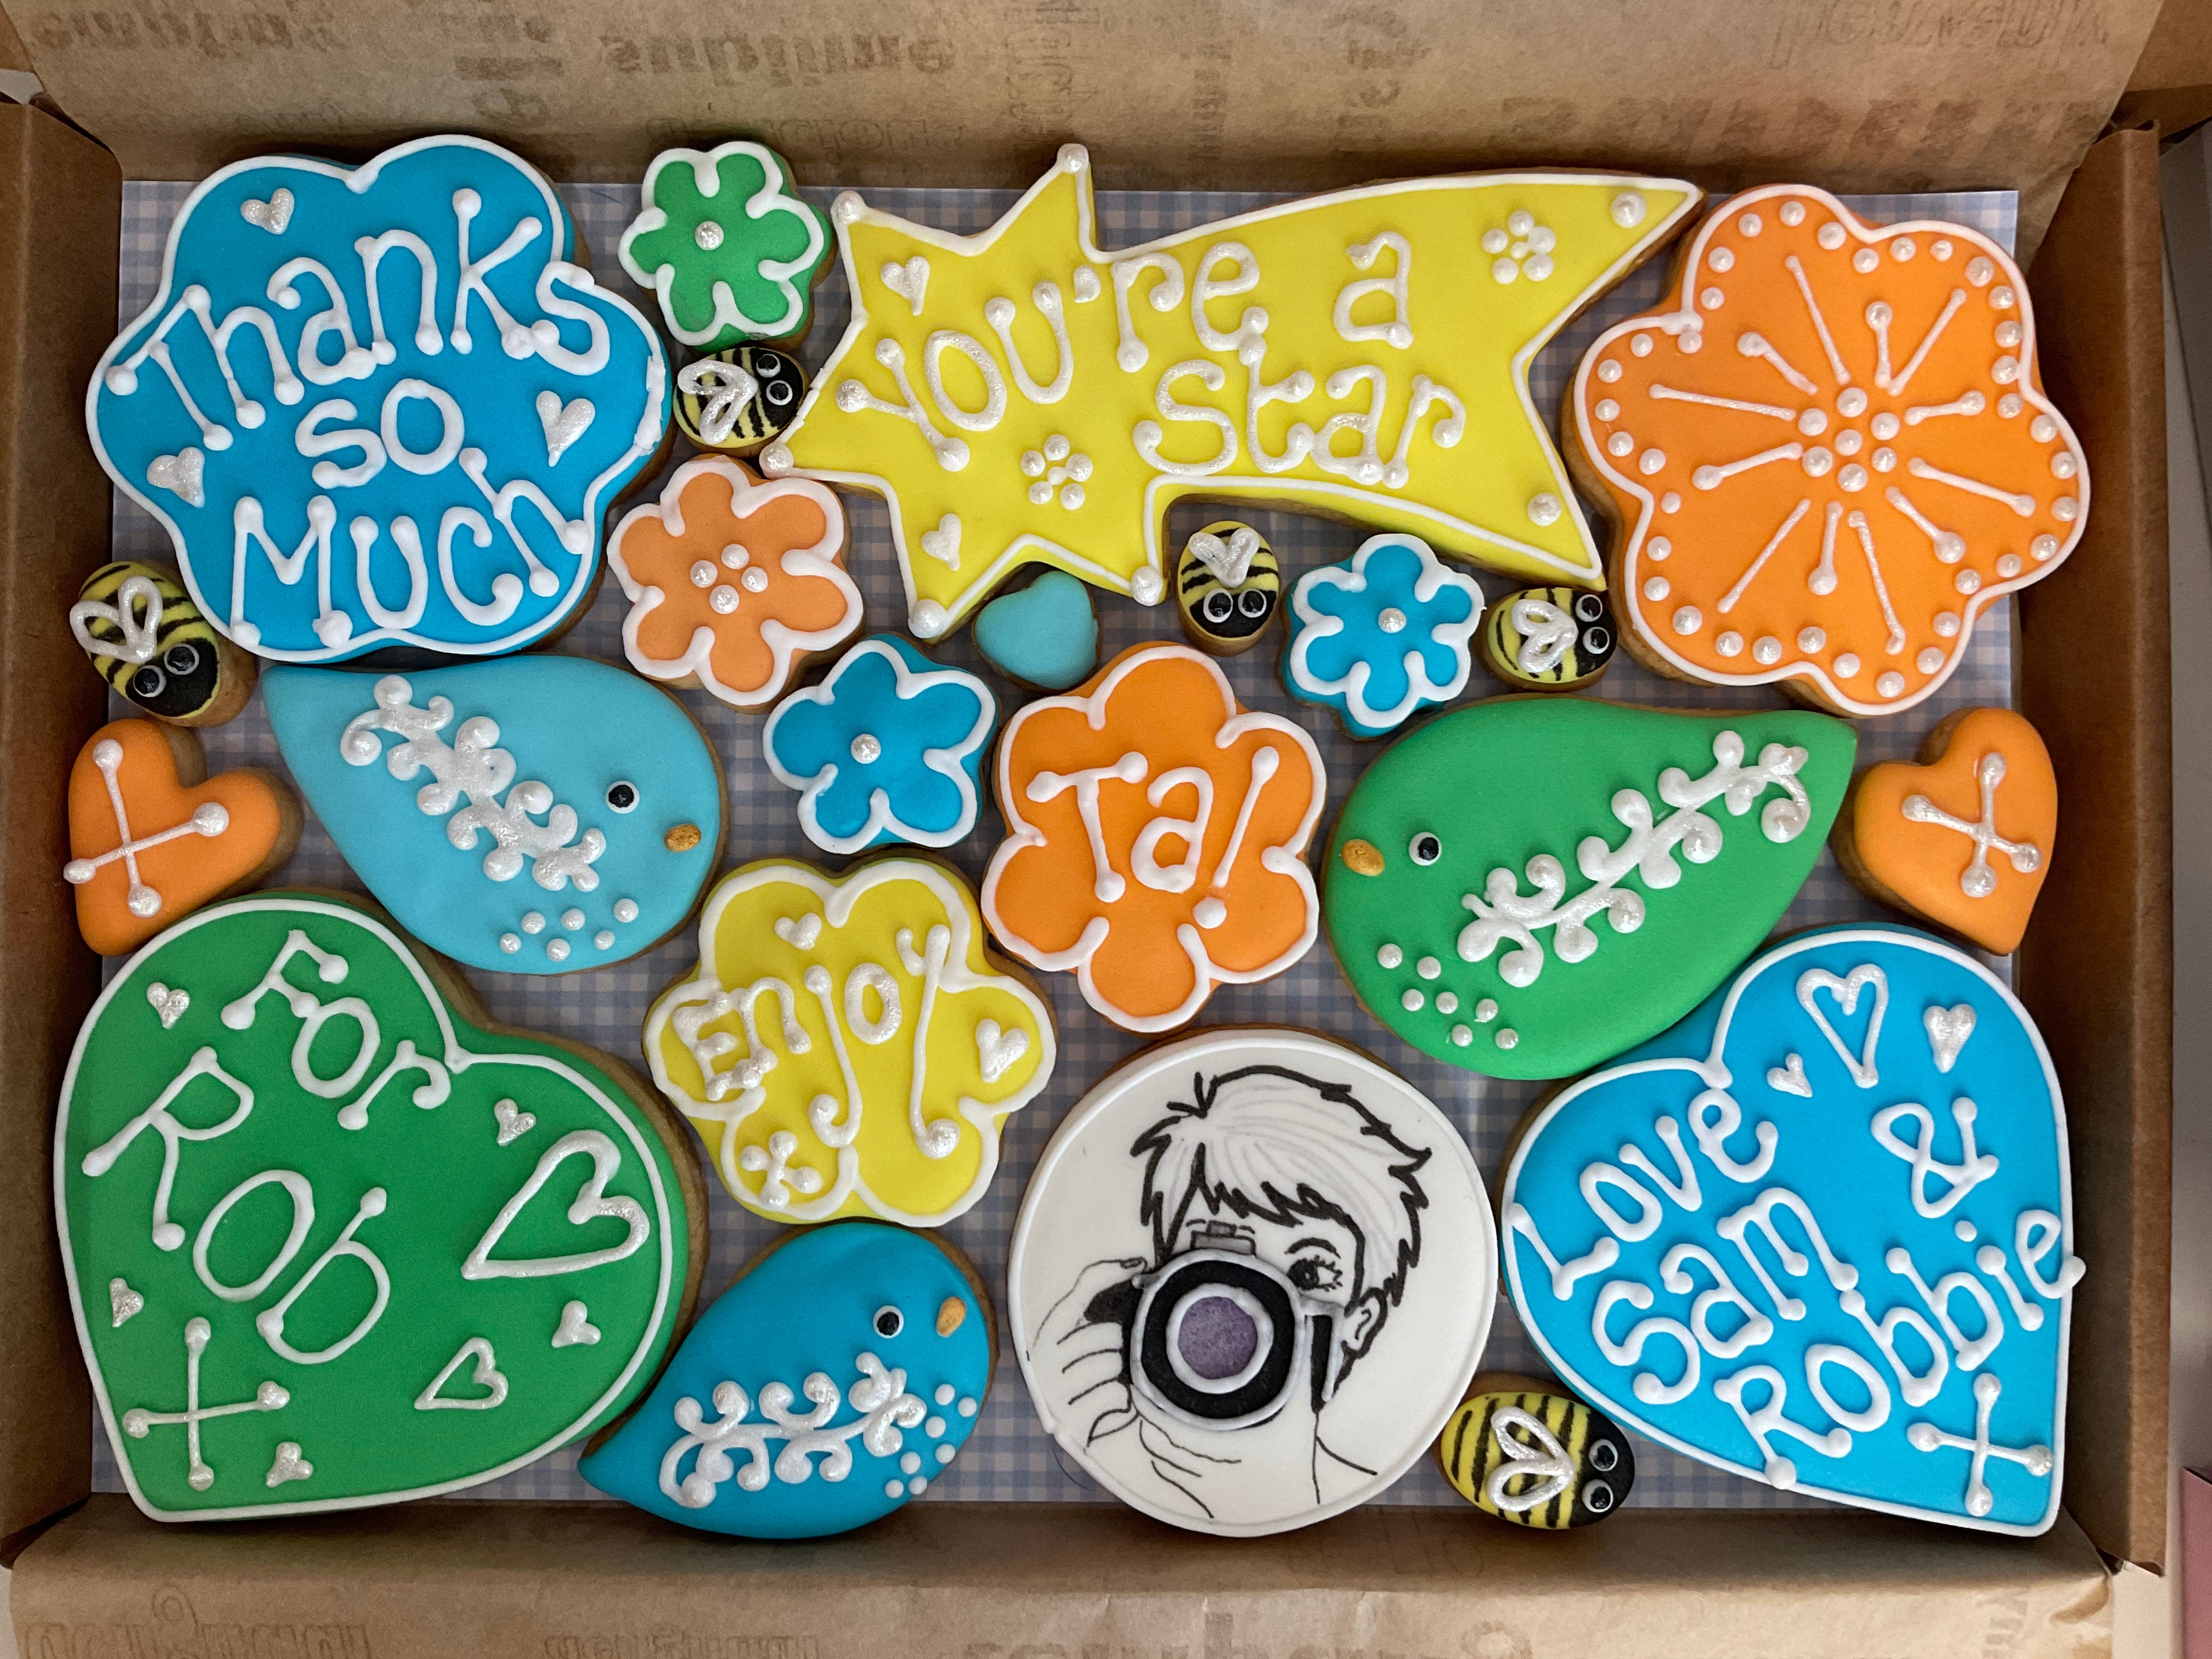 Corporate Thank You Cookie Box (Large)